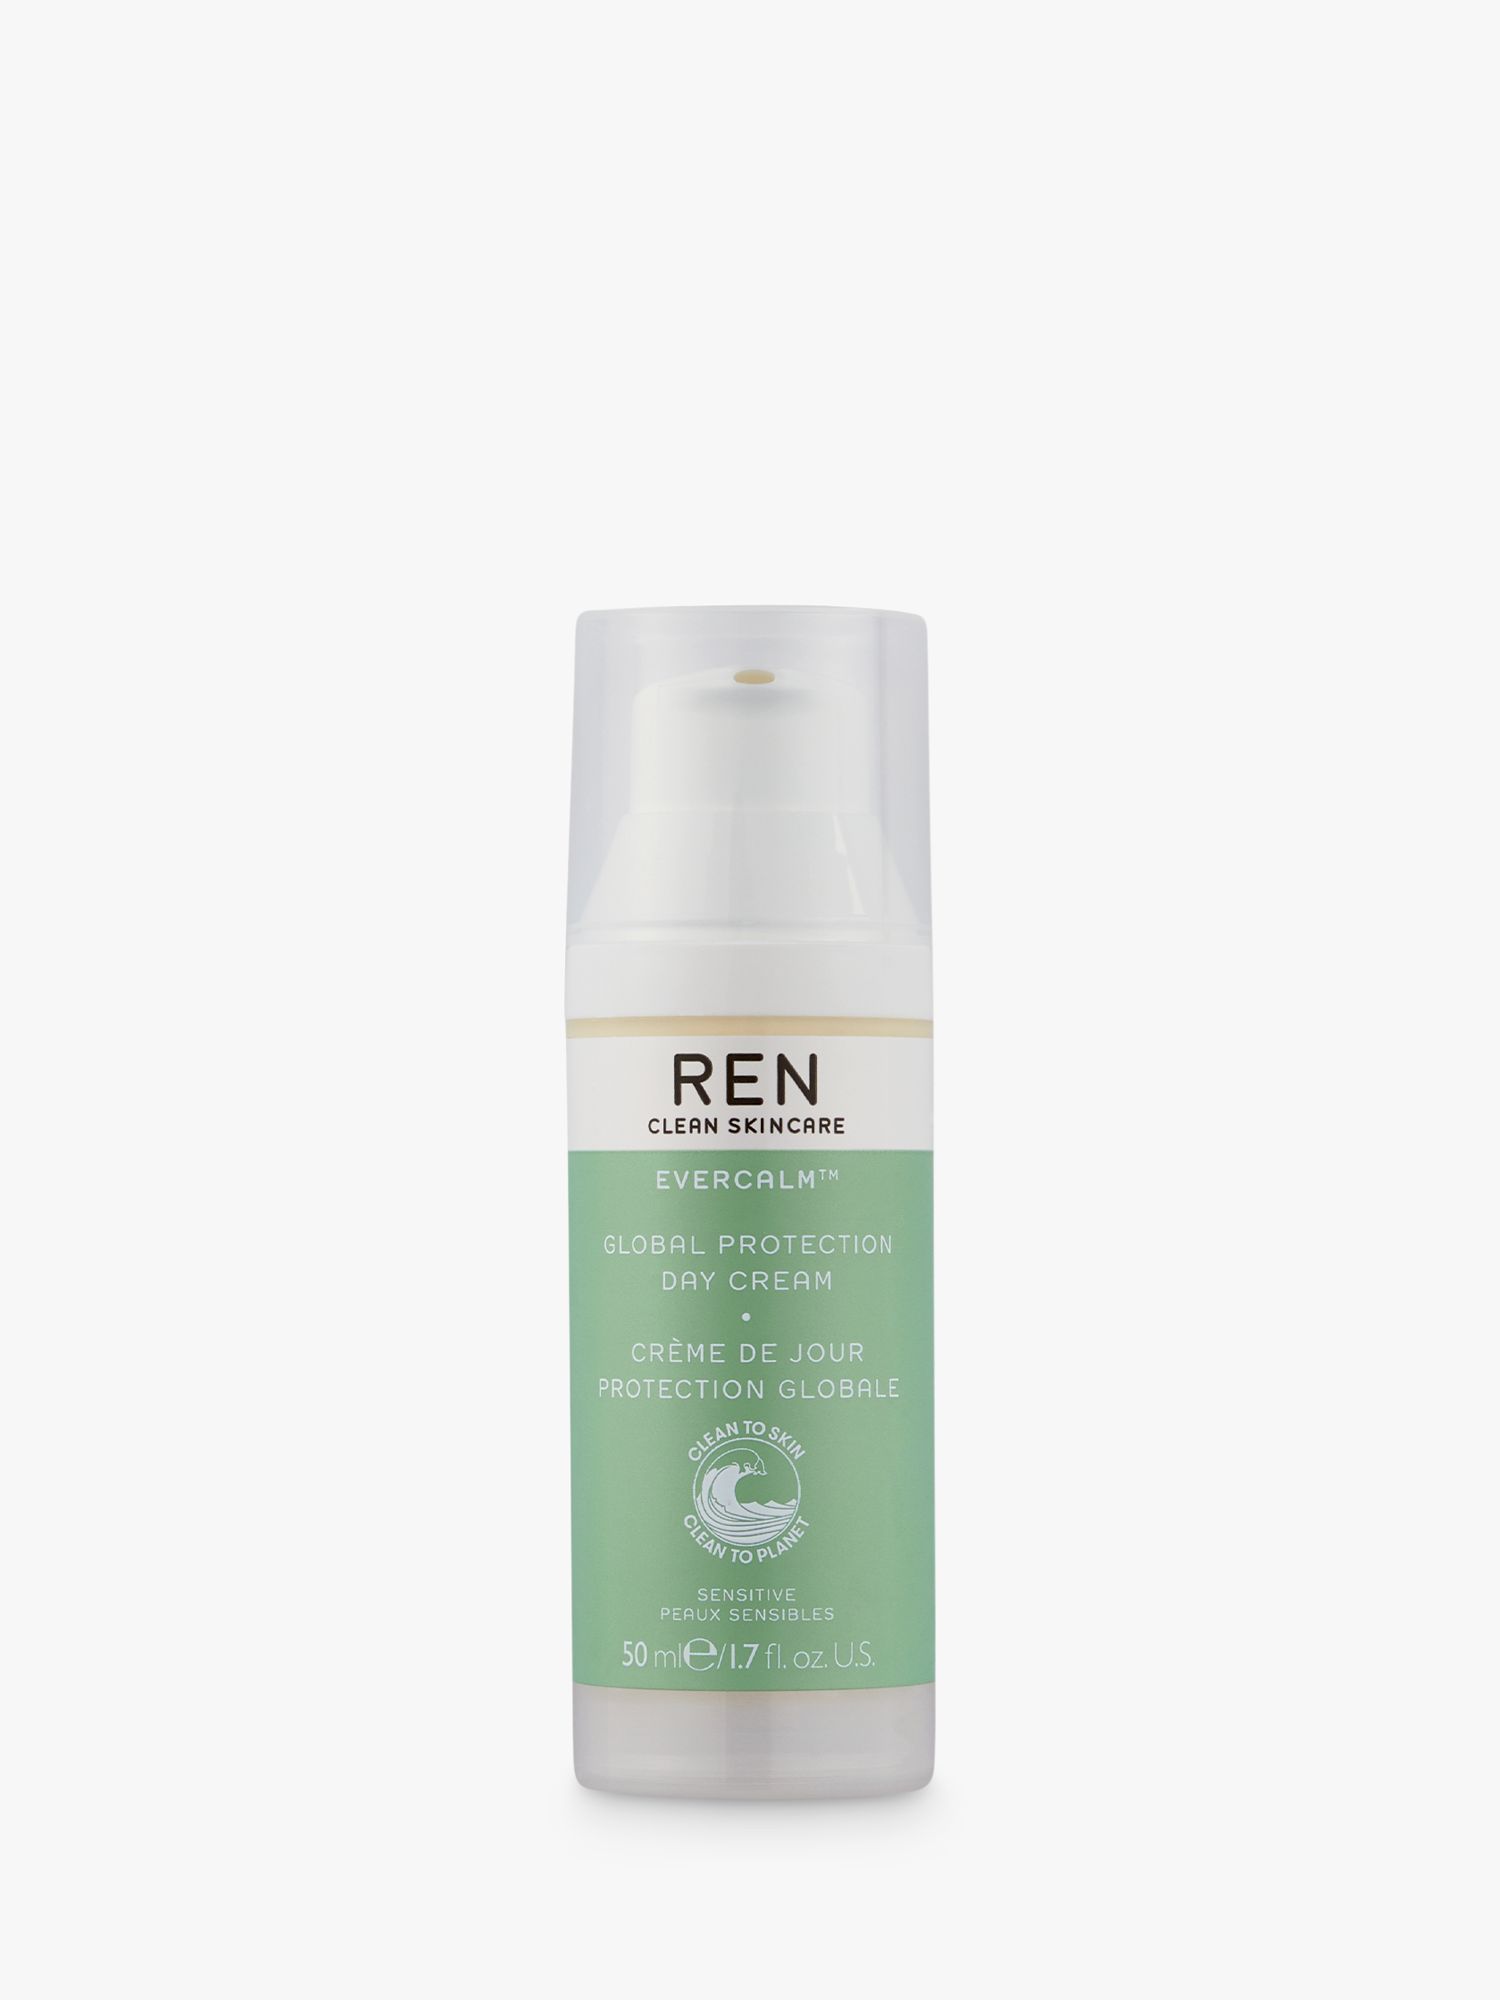 REN Clean Skincare Evercalm Global Protection Day Cream, 50ml 1